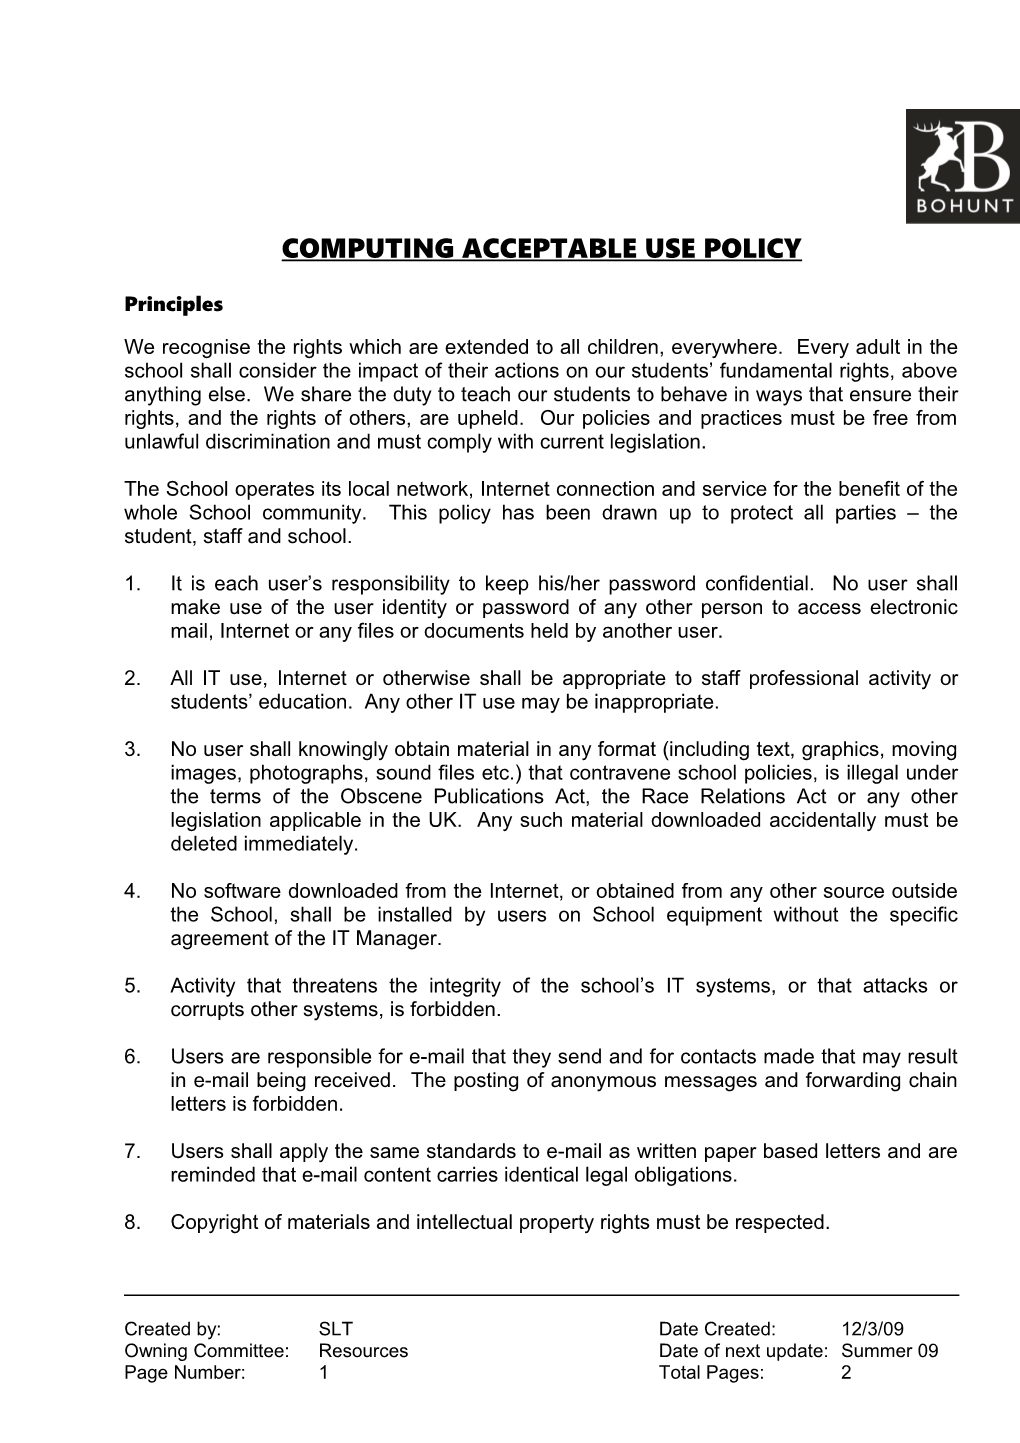 Computing Acceptable Use Policy